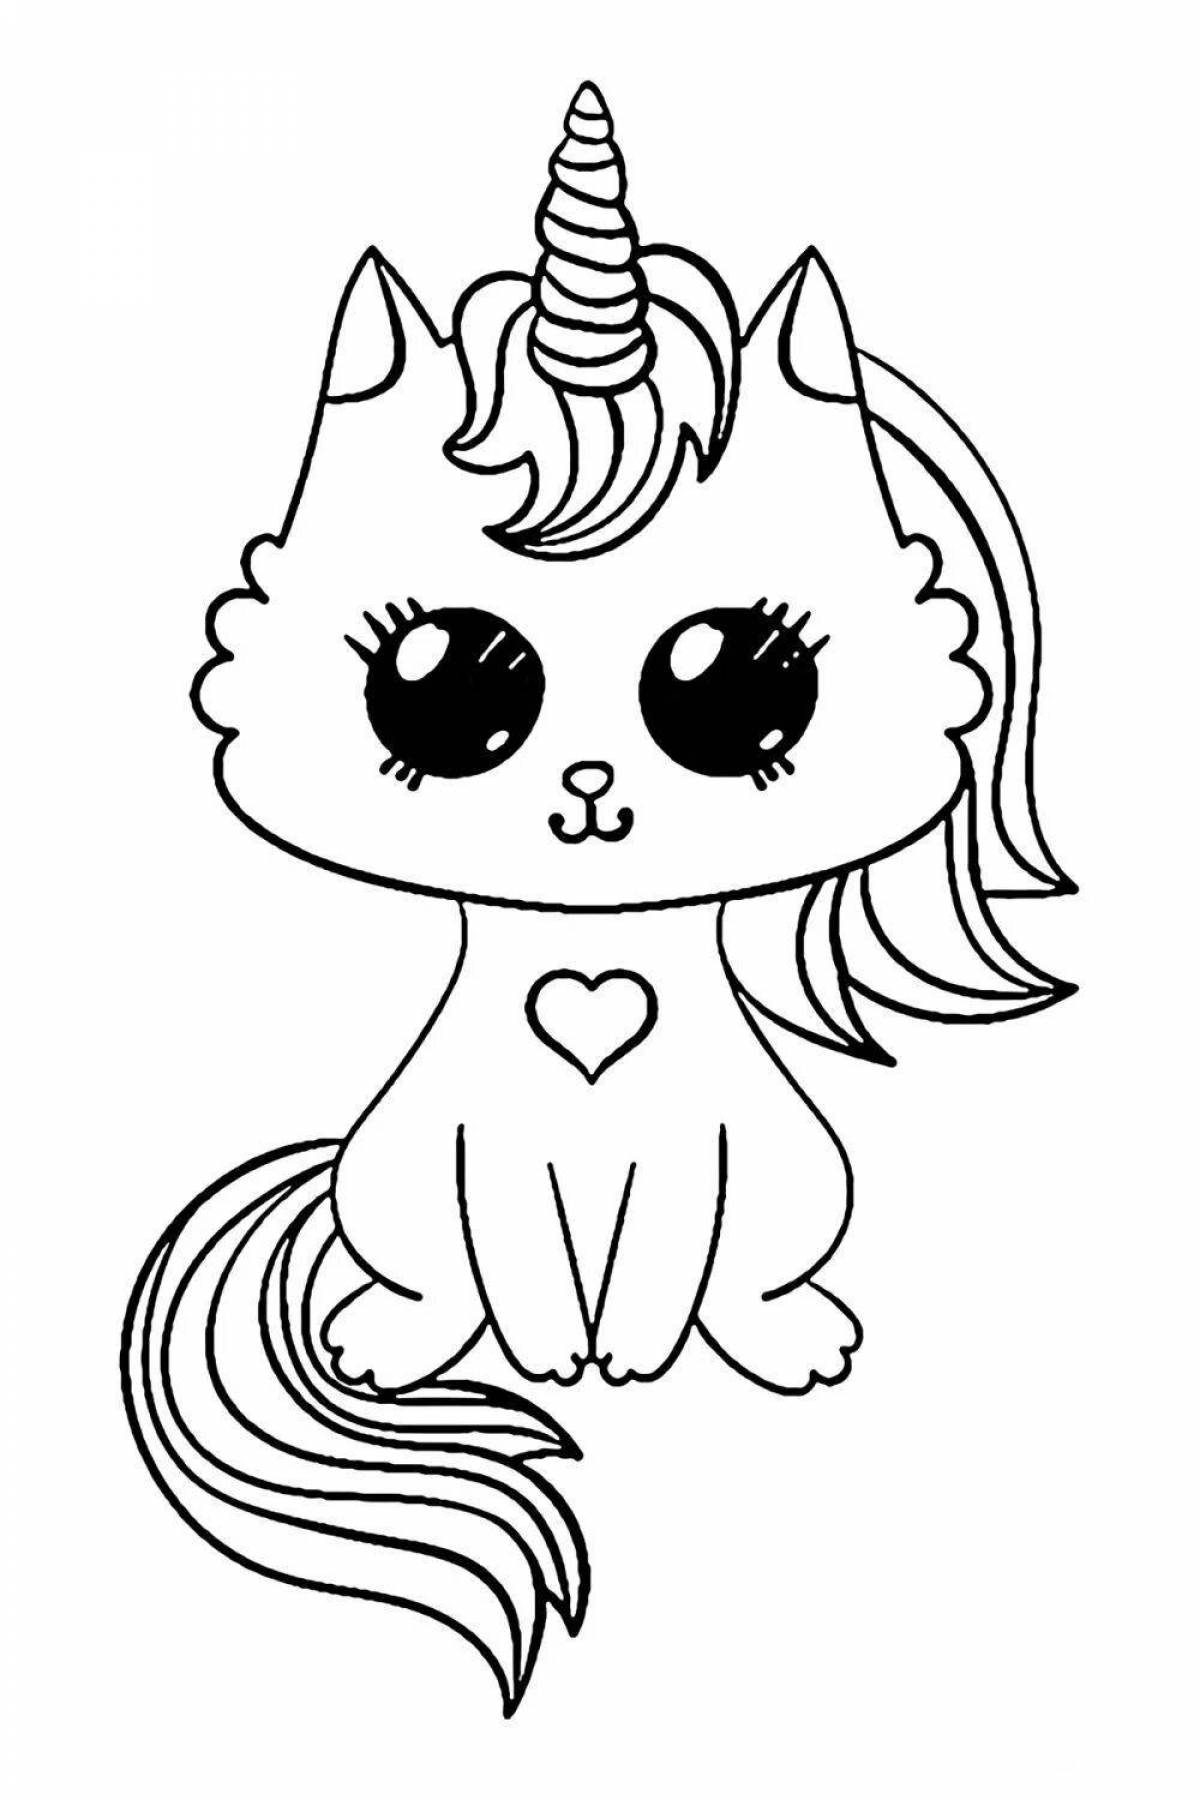 Grand coloring page unicorn cat for kids